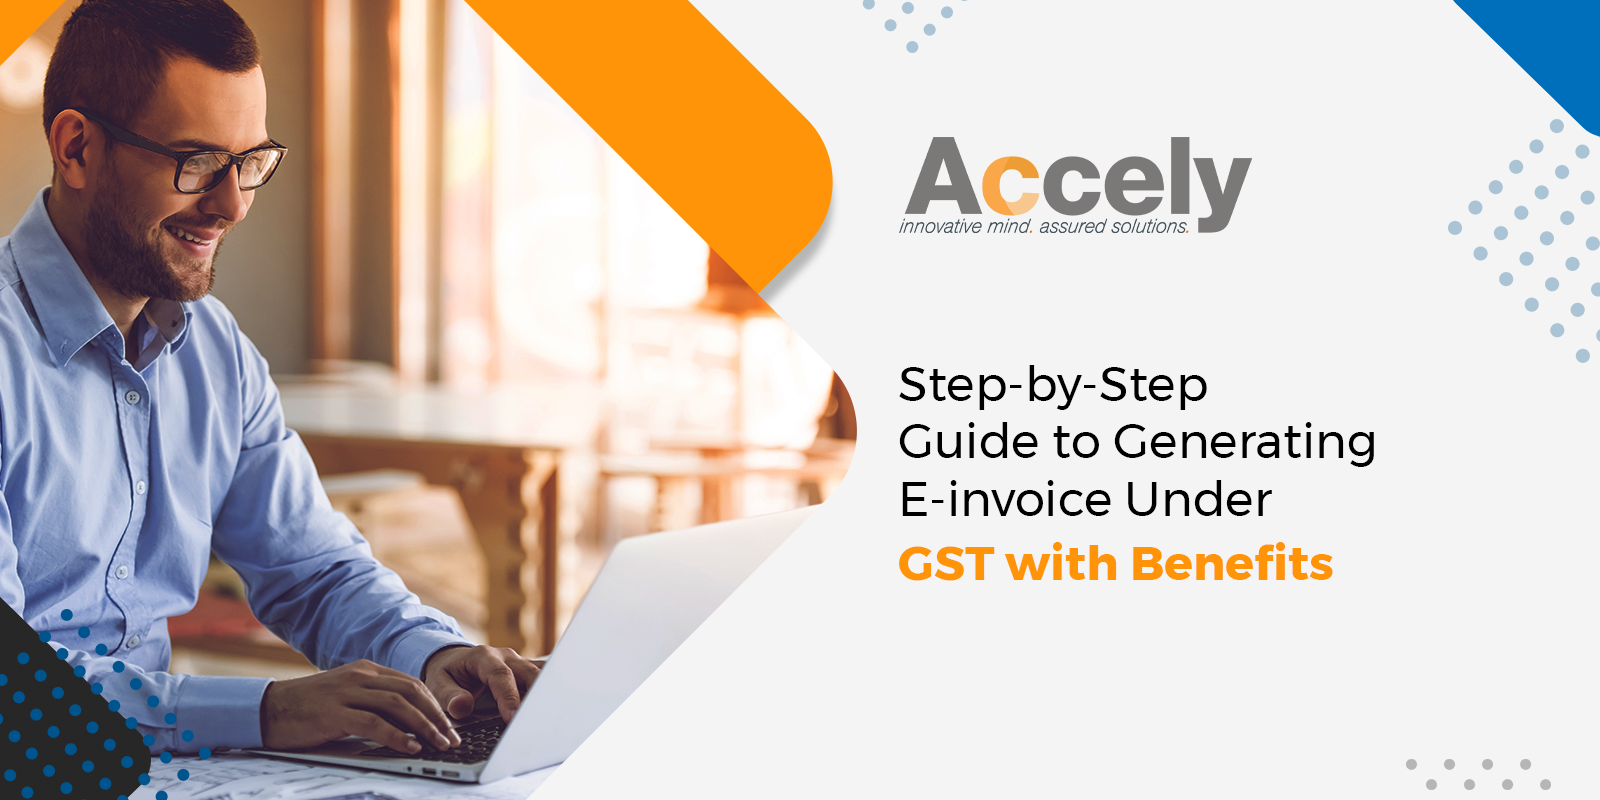 Step-by-Step Guide to Generating E-invoice Under GST with Benefits